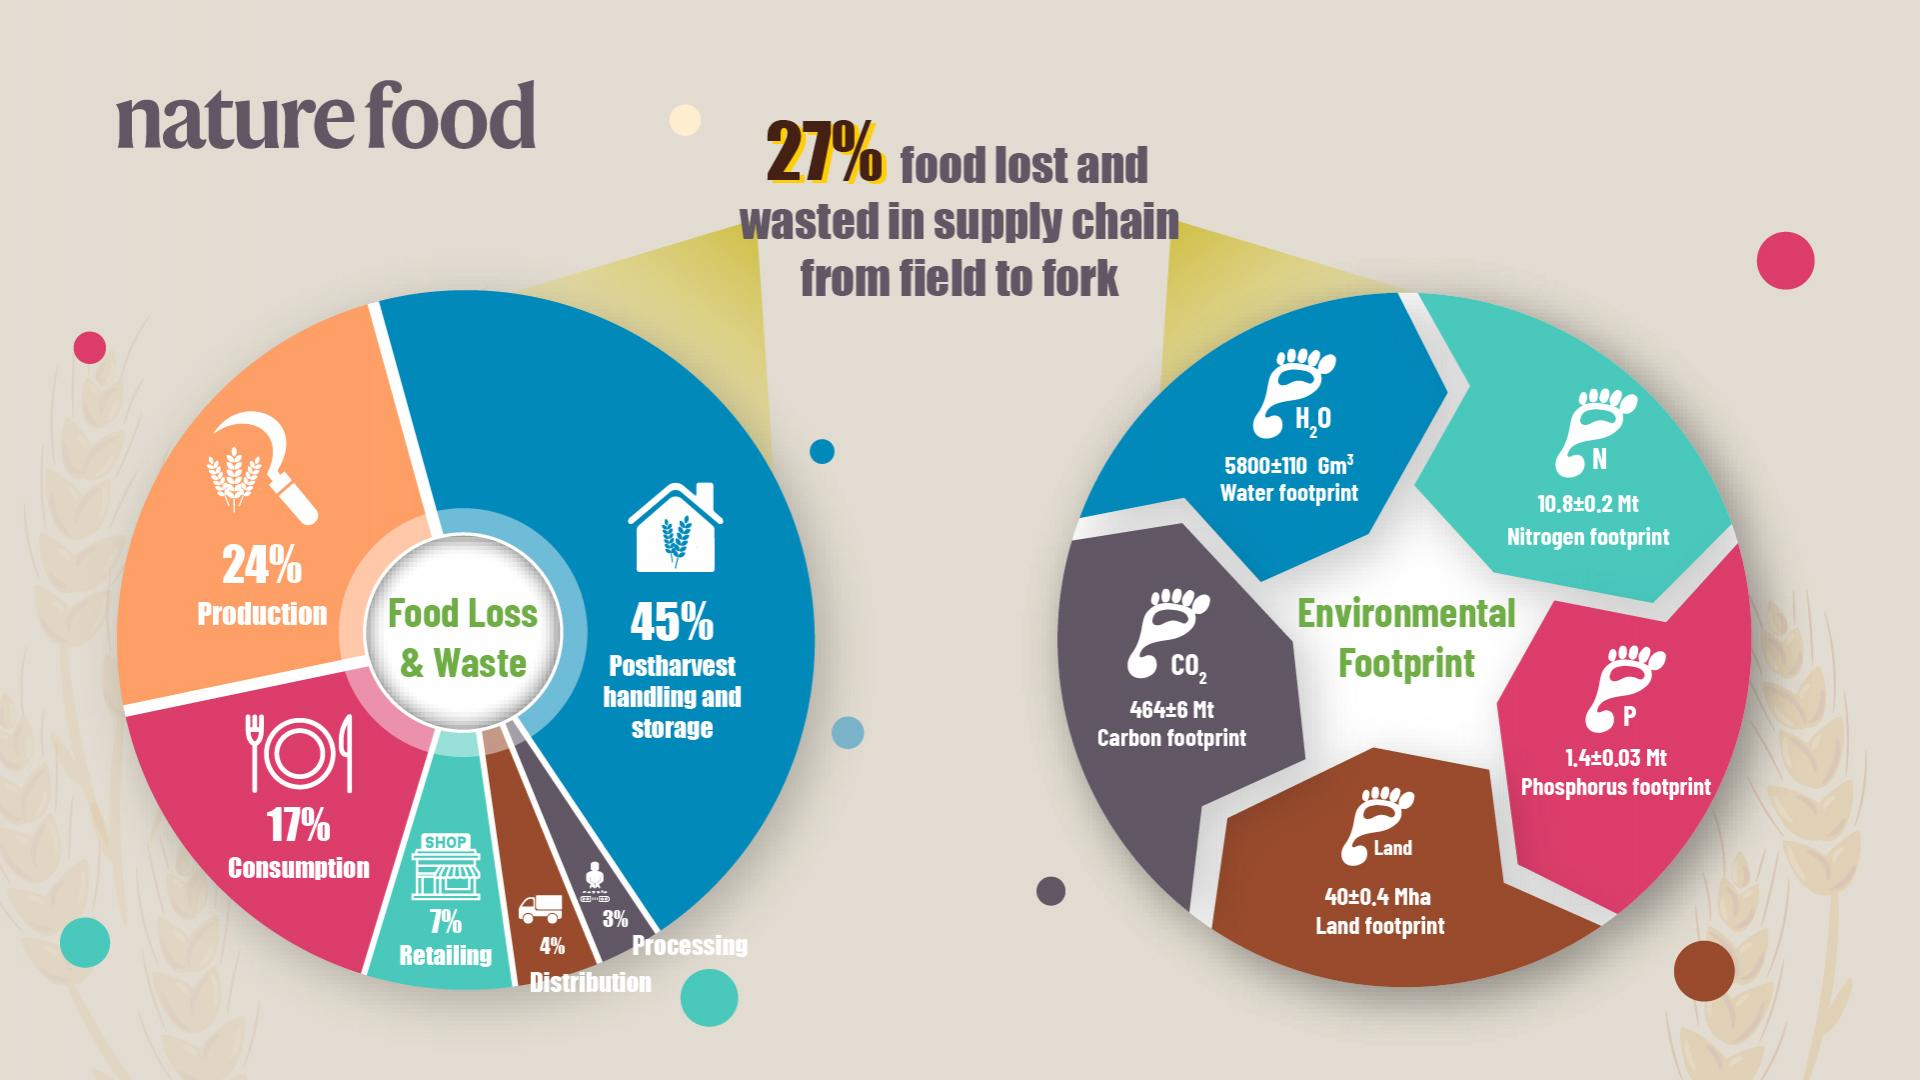 SUSTech’s Junguo Liu co-authors paper on food waste and its environmental impact